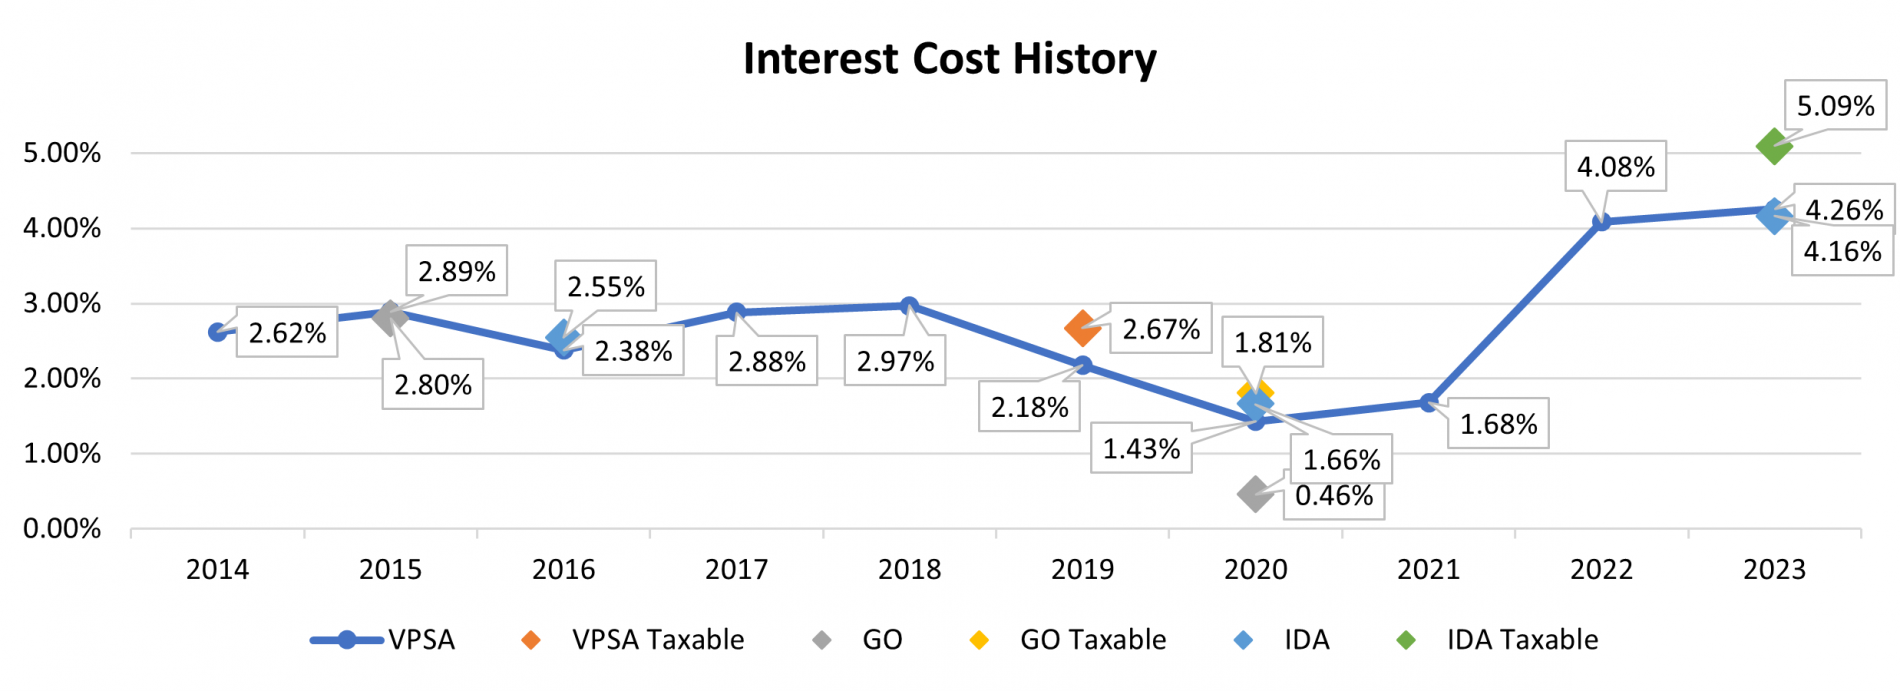 Interest Cost History Graph 